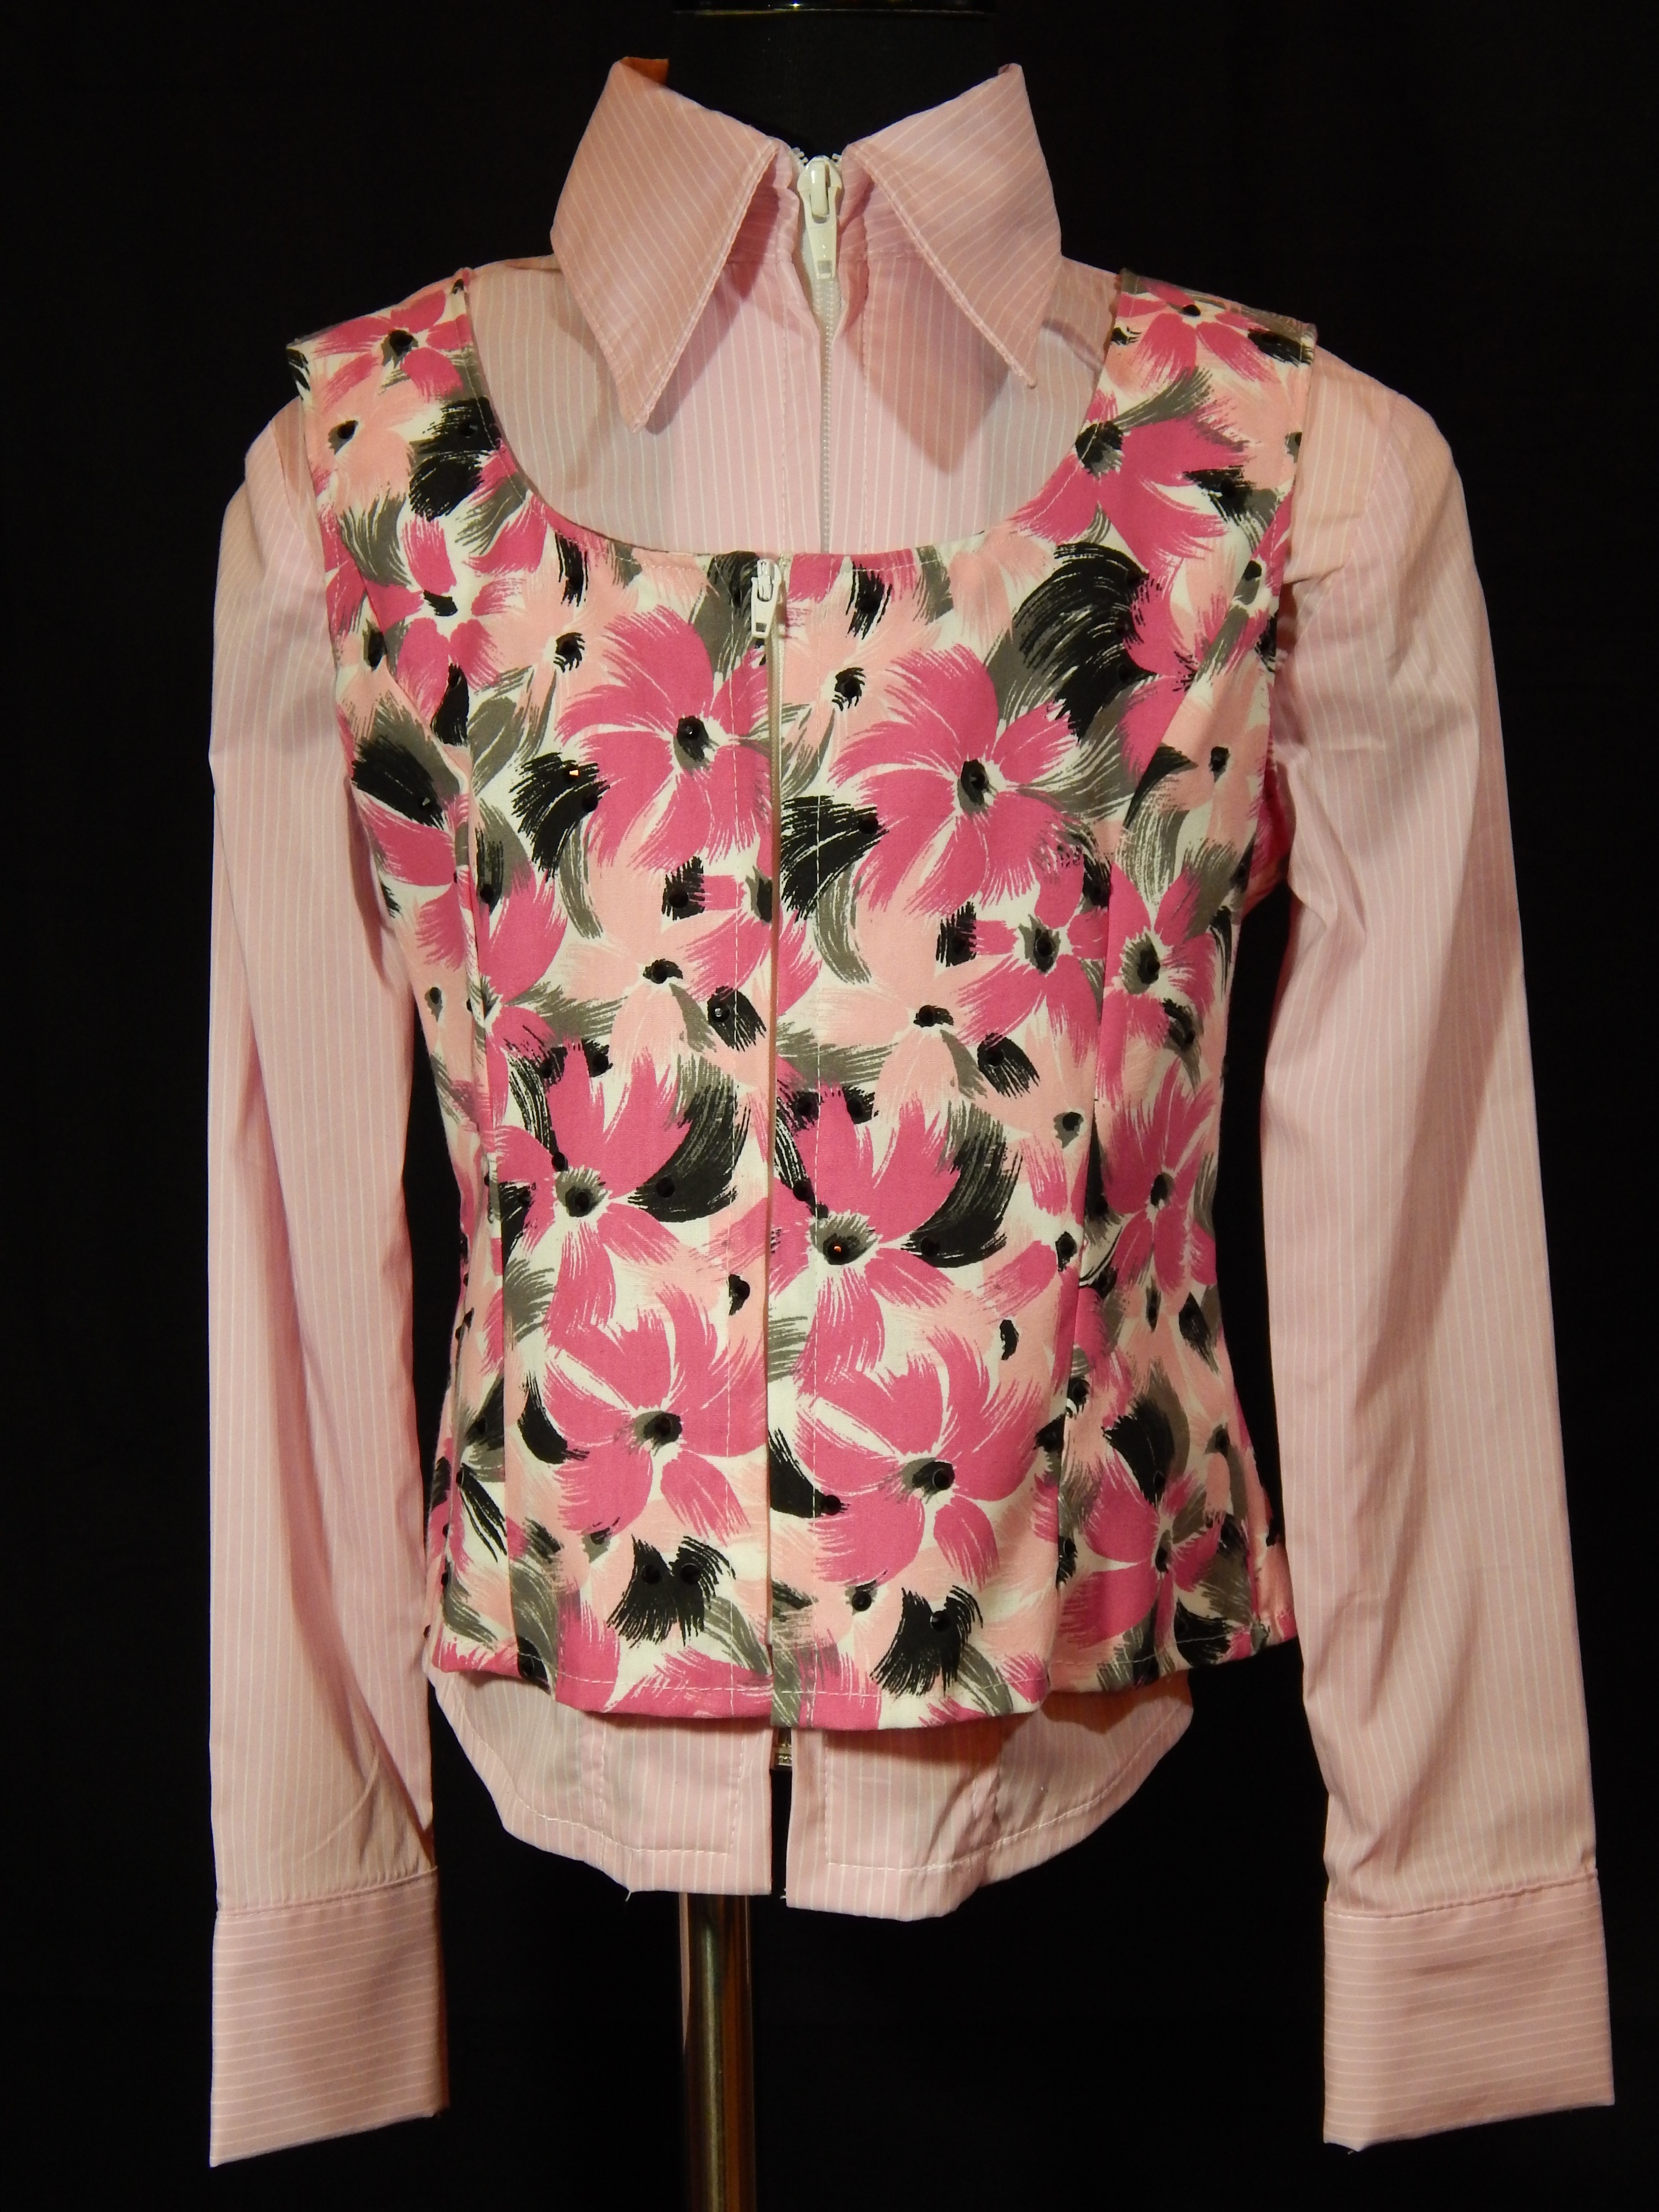 MKC YOUTH Horse Show Vest - Pink, Black, White, Gray Floral